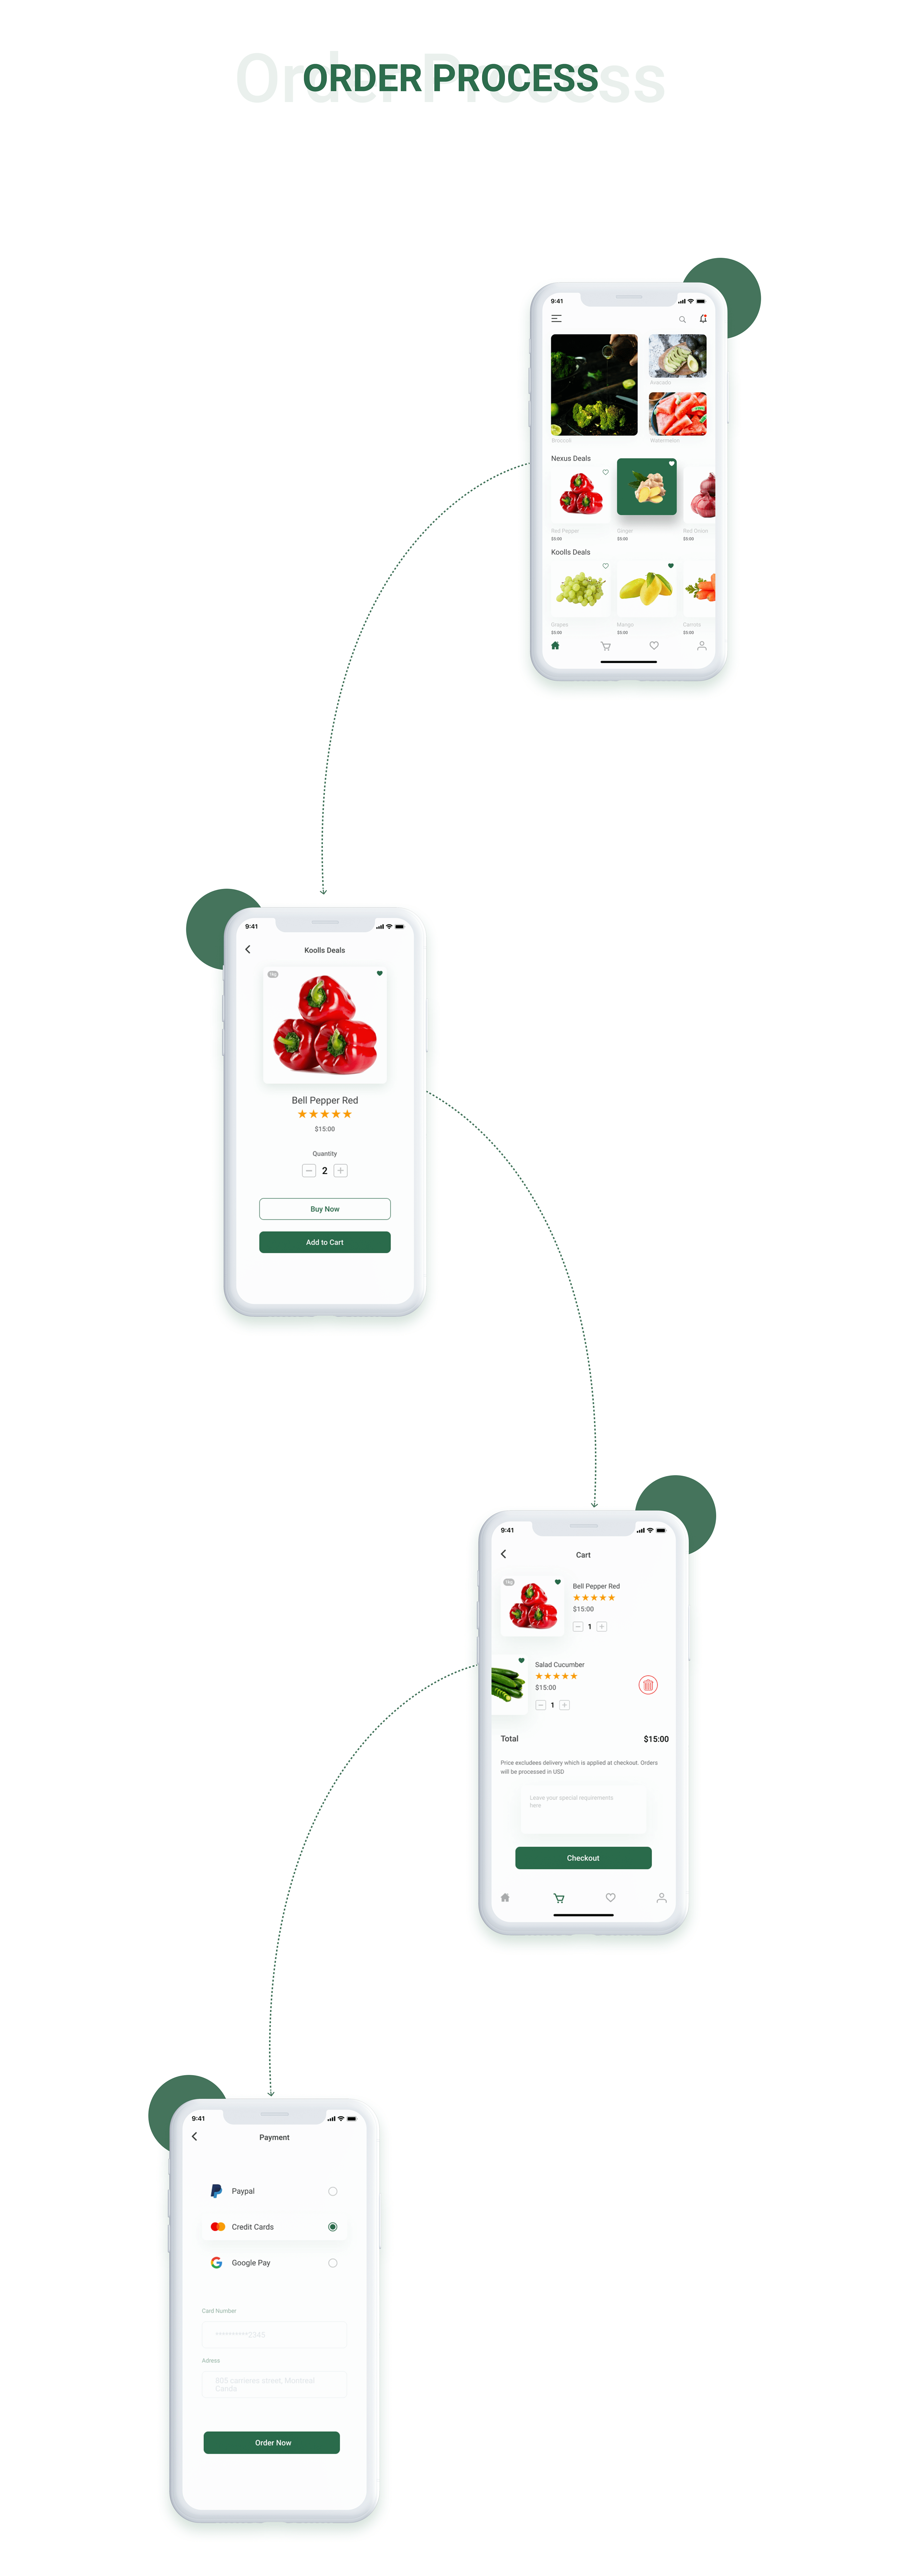 case study on online grocery